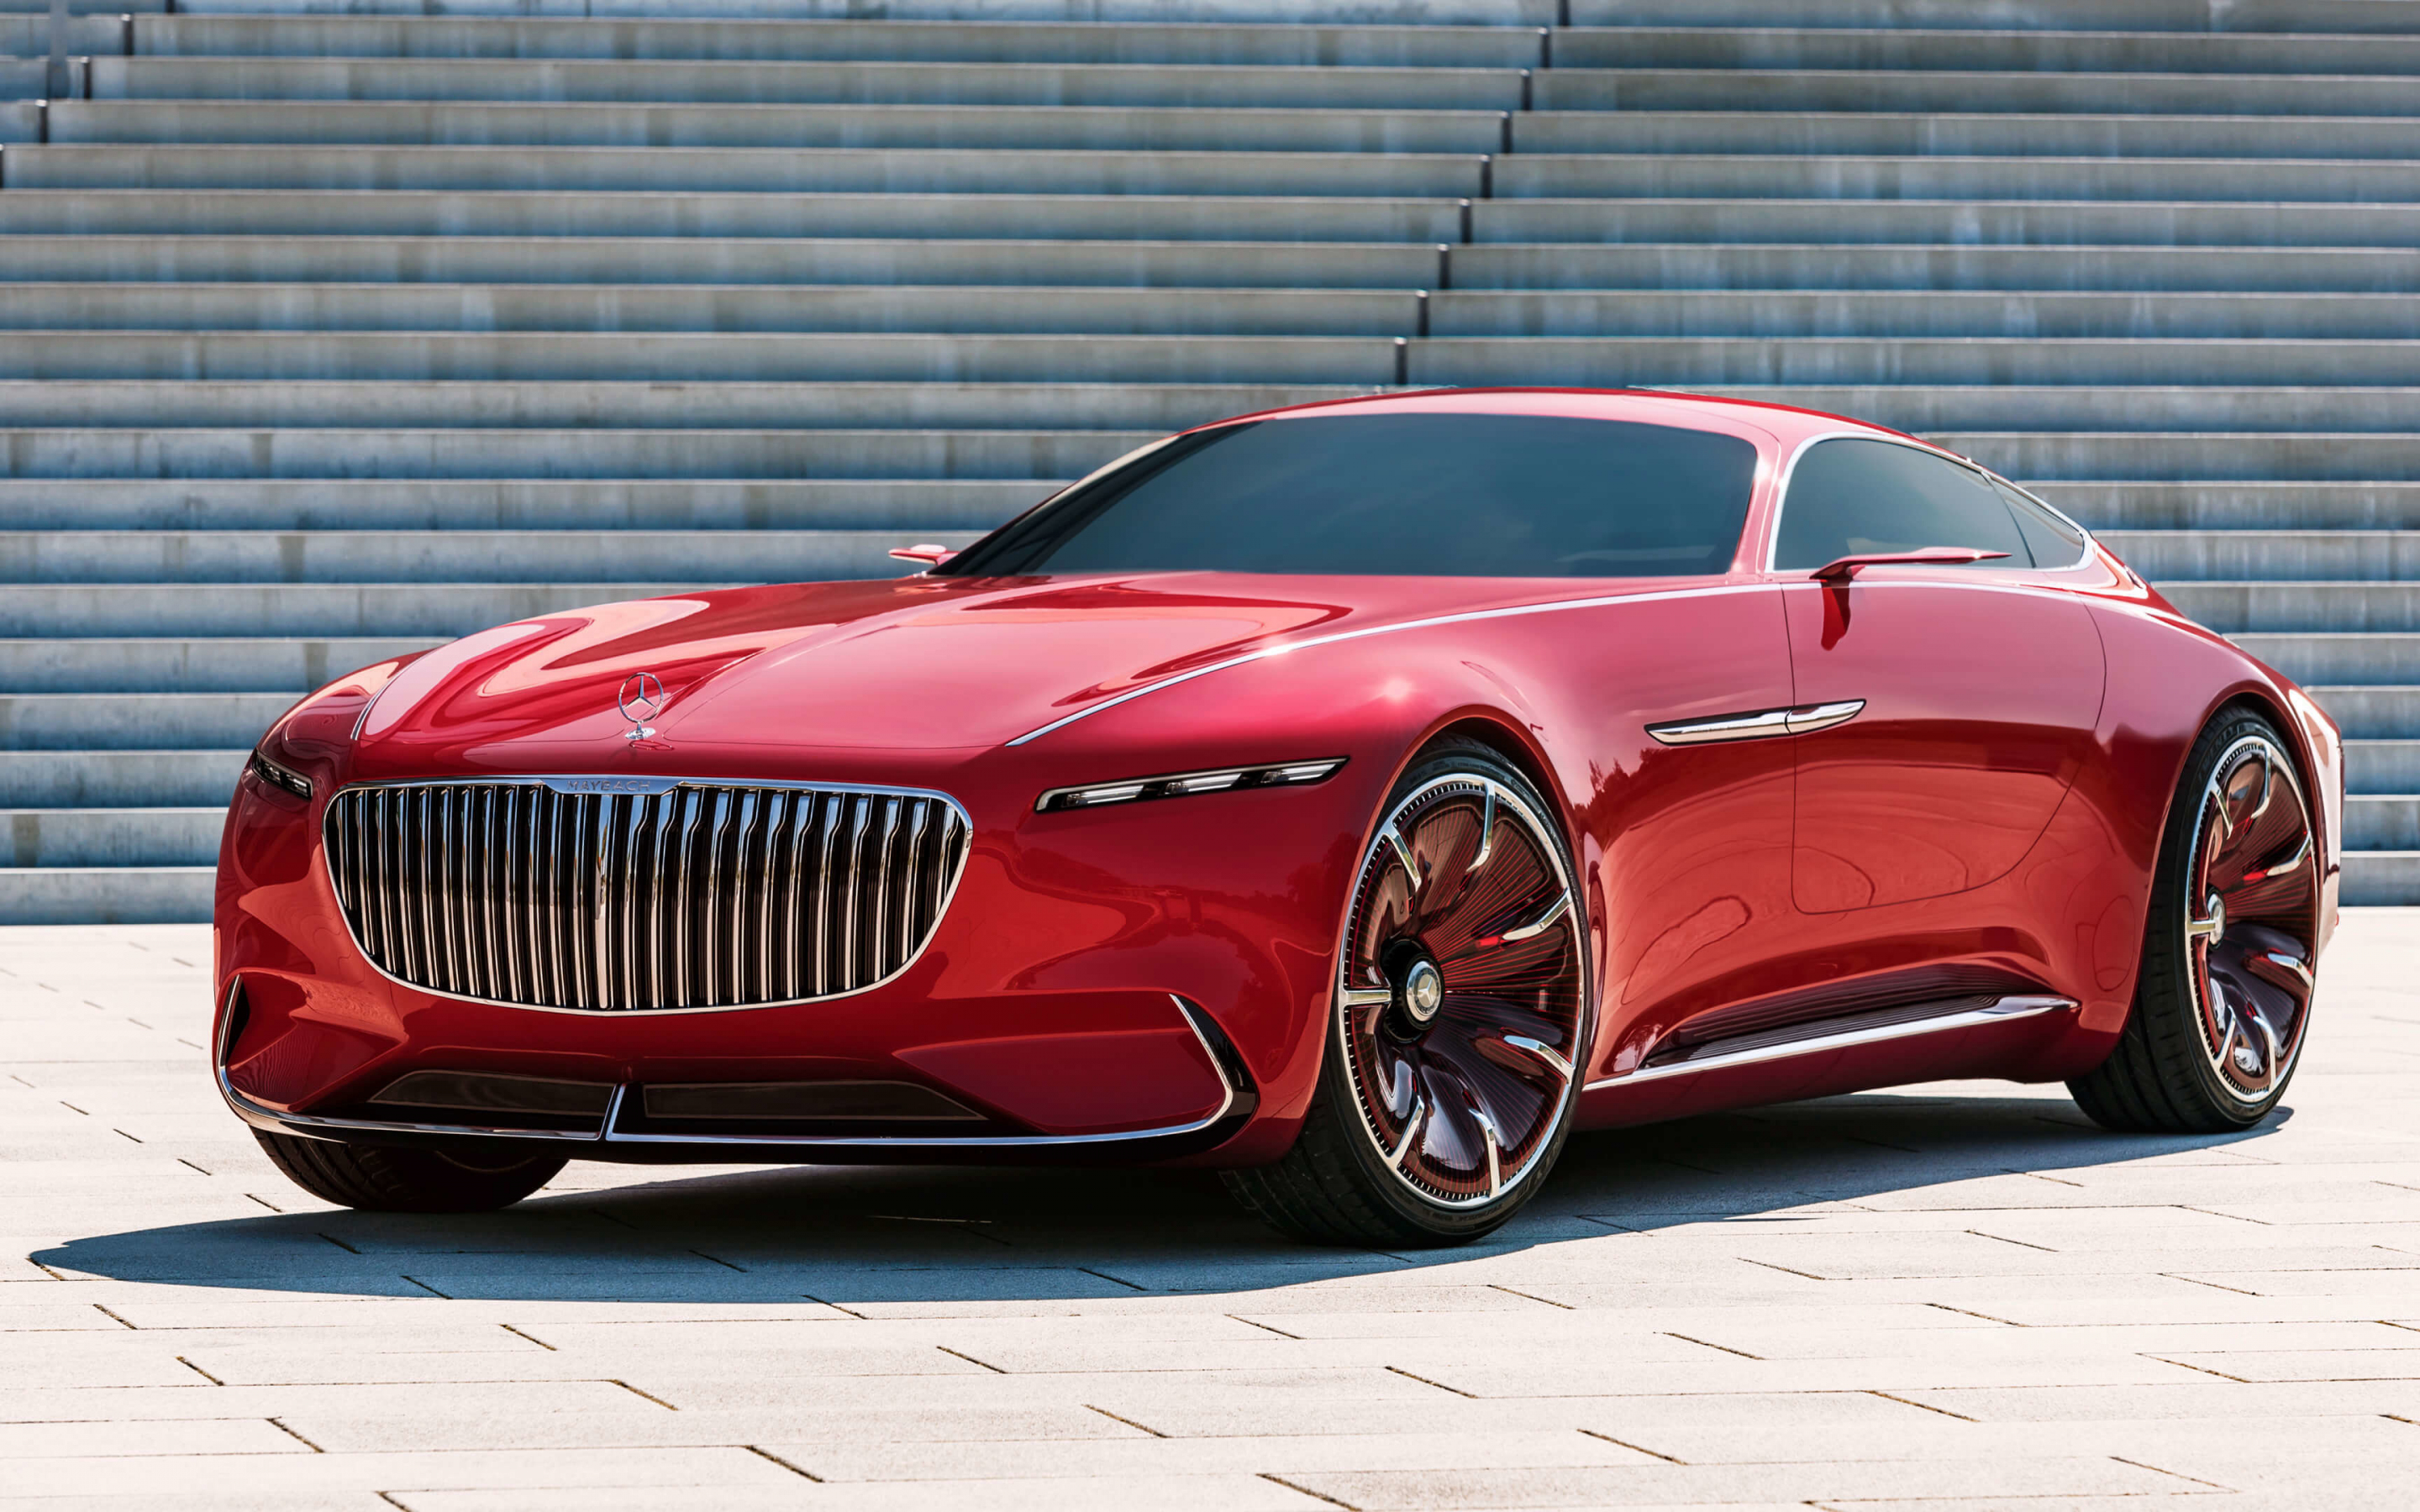 Vision Mercedes-Maybach Ultimate Luxury, luxury car, 2880x1800 wallpaper